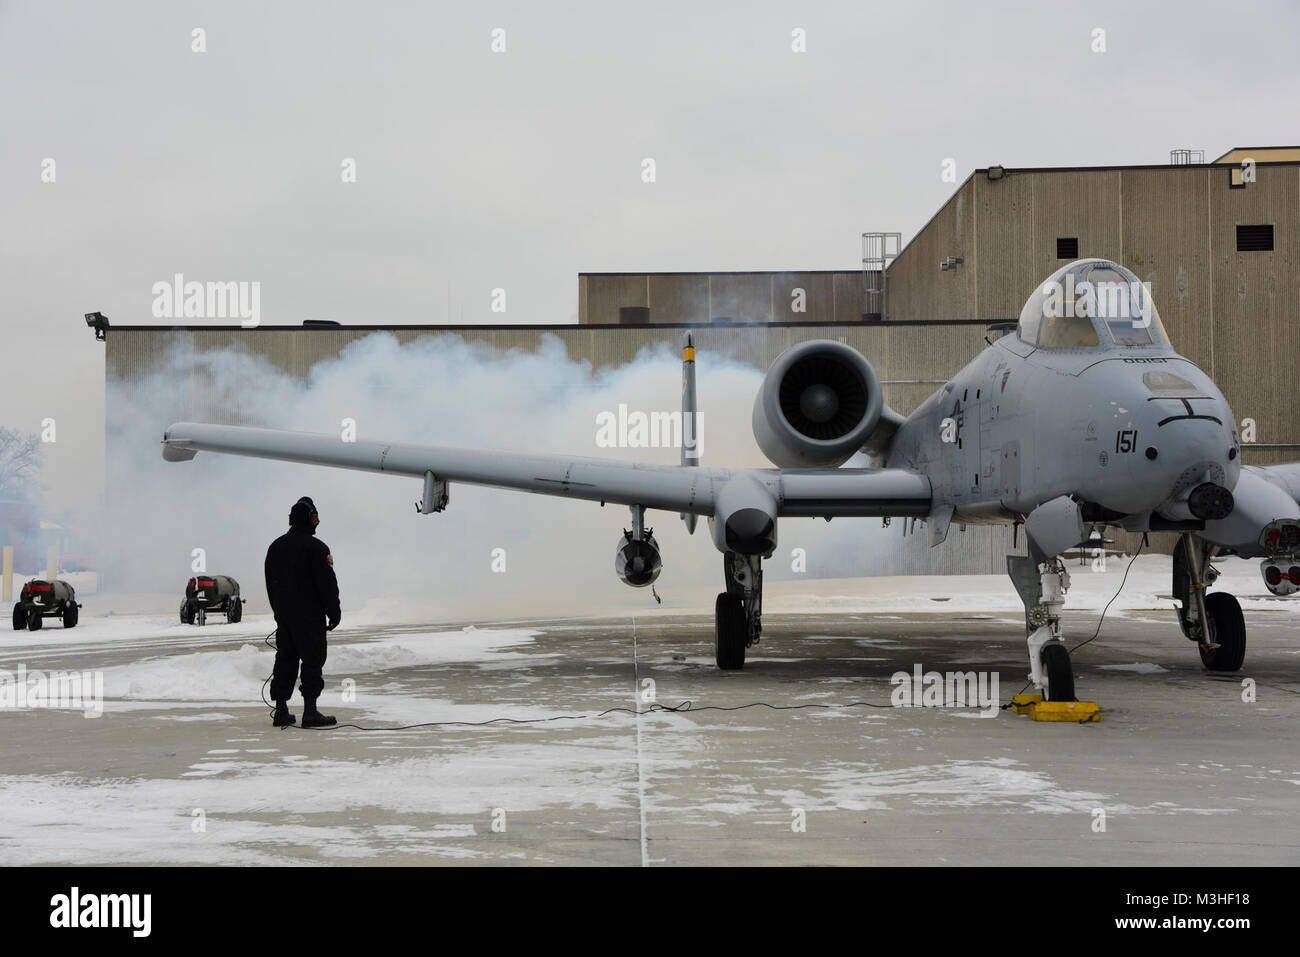 U.S. Air Force Staff Sgt. Andre Gonzales, A-10C Thunderbolt II Demonstration Team avionics systems craftsman, conducts startup procedures with Capt. Cody Wilton, A-10 Demo Team commander, prior to a flight at Minneapolis-St. Paul Air Reserve Station, Minn., Feb. 5, 2018. The A-10 Demo Team visited Minneapolis to support a Air Force Heritage Flight flyover for Super Bowl 52. (U.S. Air Force Stock Photo